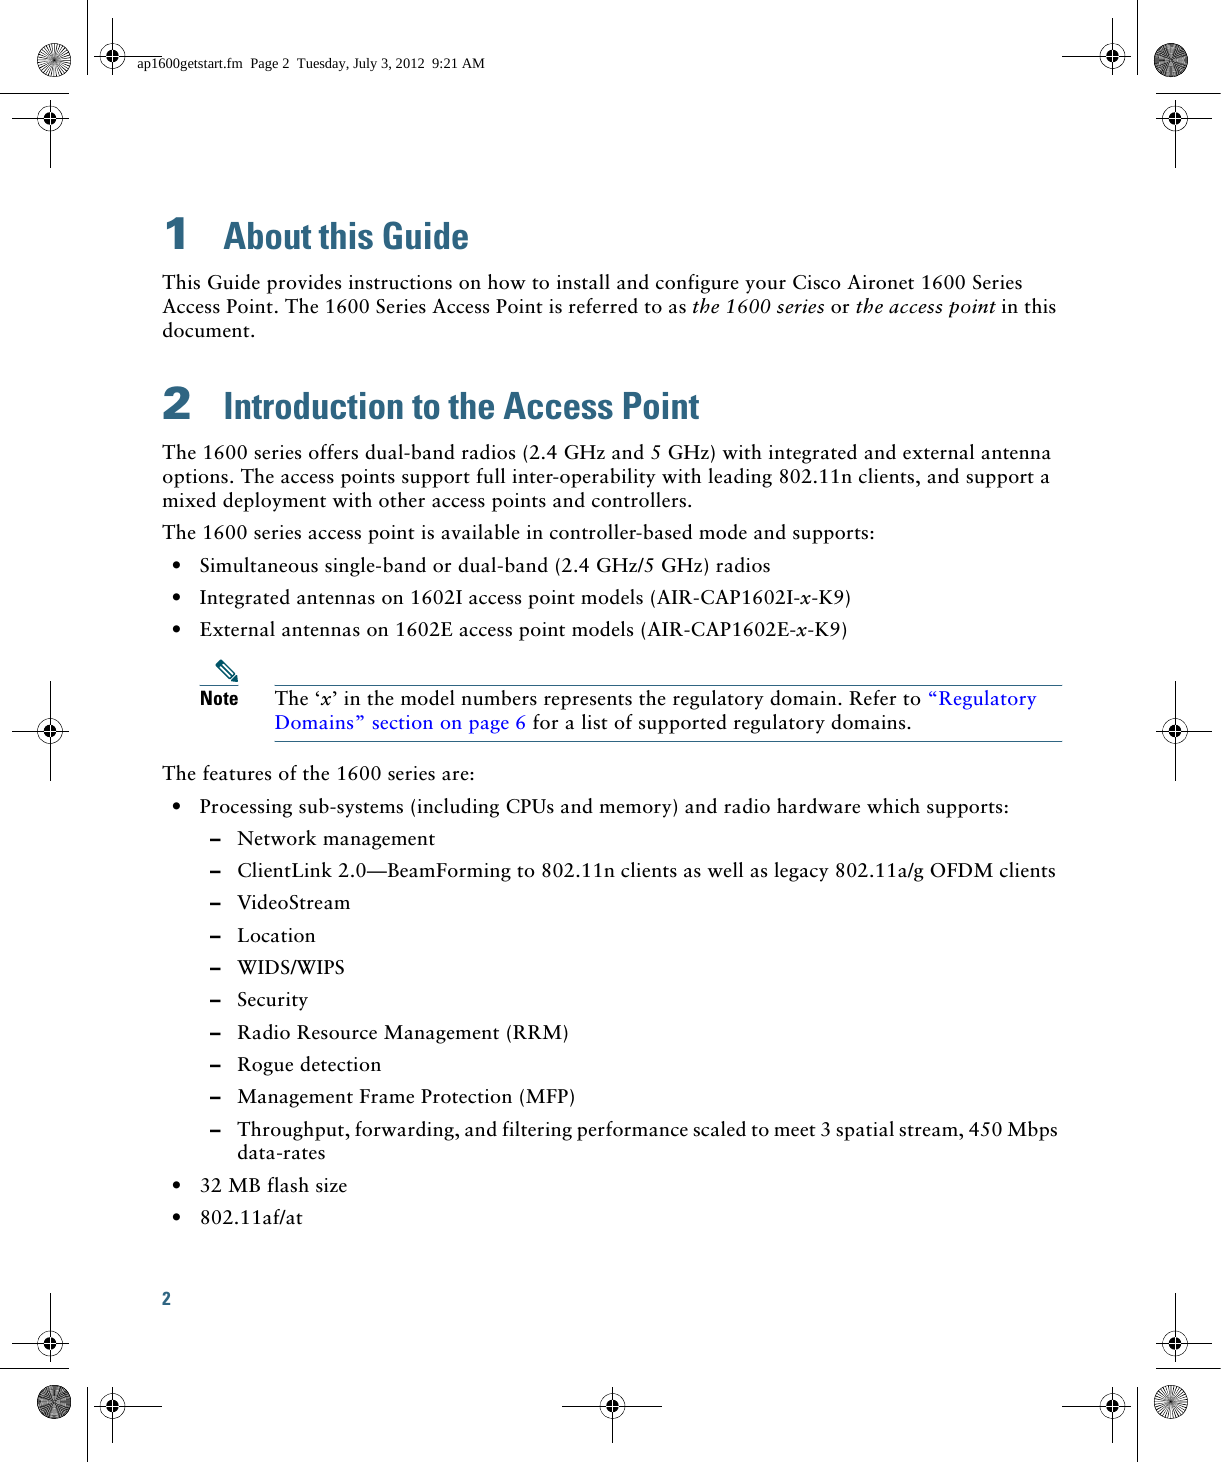 2 1  About this GuideThis Guide provides instructions on how to install and configure your Cisco Aironet 1600 Series Access Point. The 1600 Series Access Point is referred to as the 1600 series or the access point in this document.2  Introduction to the Access PointThe 1600 series offers dual-band radios (2.4 GHz and 5 GHz) with integrated and external antenna options. The access points support full inter-operability with leading 802.11n clients, and support a mixed deployment with other access points and controllers.The 1600 series access point is available in controller-based mode and supports:  • Simultaneous single-band or dual-band (2.4 GHz/5 GHz) radios  • Integrated antennas on 1602I access point models (AIR-CAP1602I-x-K9)  • External antennas on 1602E access point models (AIR-CAP1602E-x-K9)Note The ‘x’ in the model numbers represents the regulatory domain. Refer to “Regulatory Domains” section on page 6 for a list of supported regulatory domains.The features of the 1600 series are:  • Processing sub-systems (including CPUs and memory) and radio hardware which supports:  –Network management  –ClientLink 2.0—BeamForming to 802.11n clients as well as legacy 802.11a/g OFDM clients   –VideoStream  –Location  –WIDS/WIPS  –Security  –Radio Resource Management (RRM)  –Rogue detection  –Management Frame Protection (MFP)  –Throughput, forwarding, and filtering performance scaled to meet 3 spatial stream, 450 Mbps data-rates  • 32 MB flash size  • 802.11af/atap1600getstart.fm  Page 2  Tuesday, July 3, 2012  9:21 AM